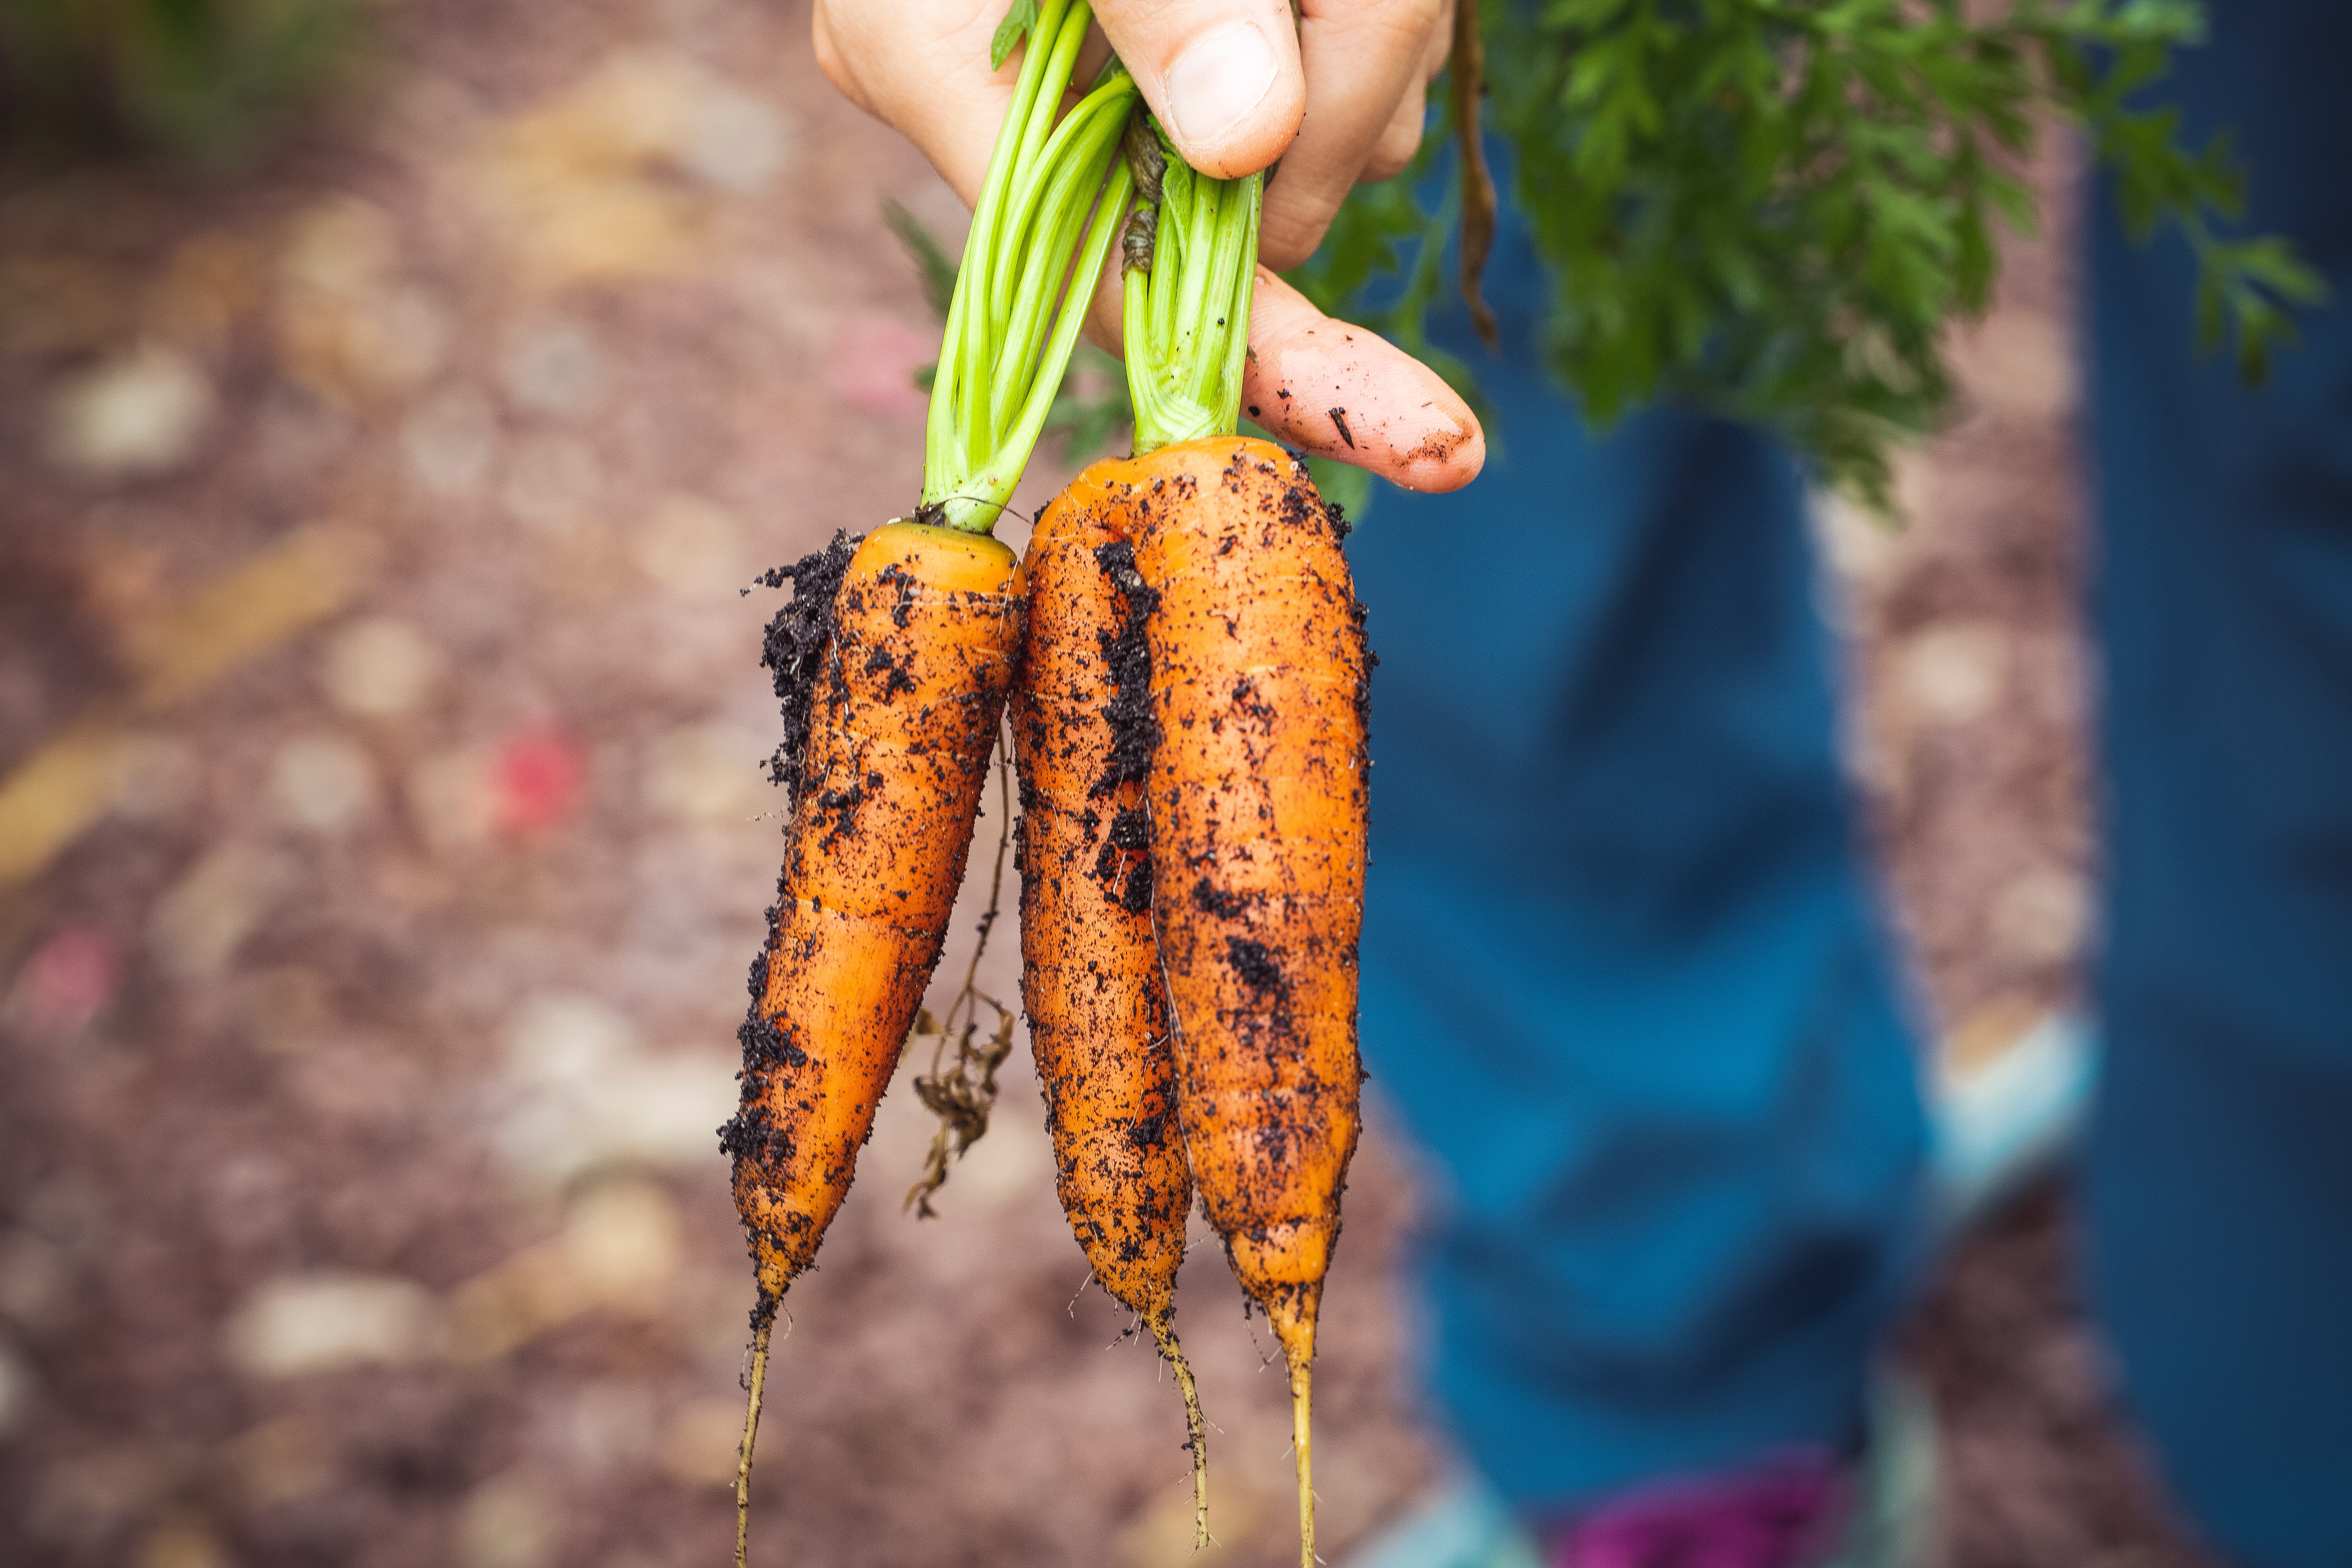 agriculture-carrots-dirty-1268101